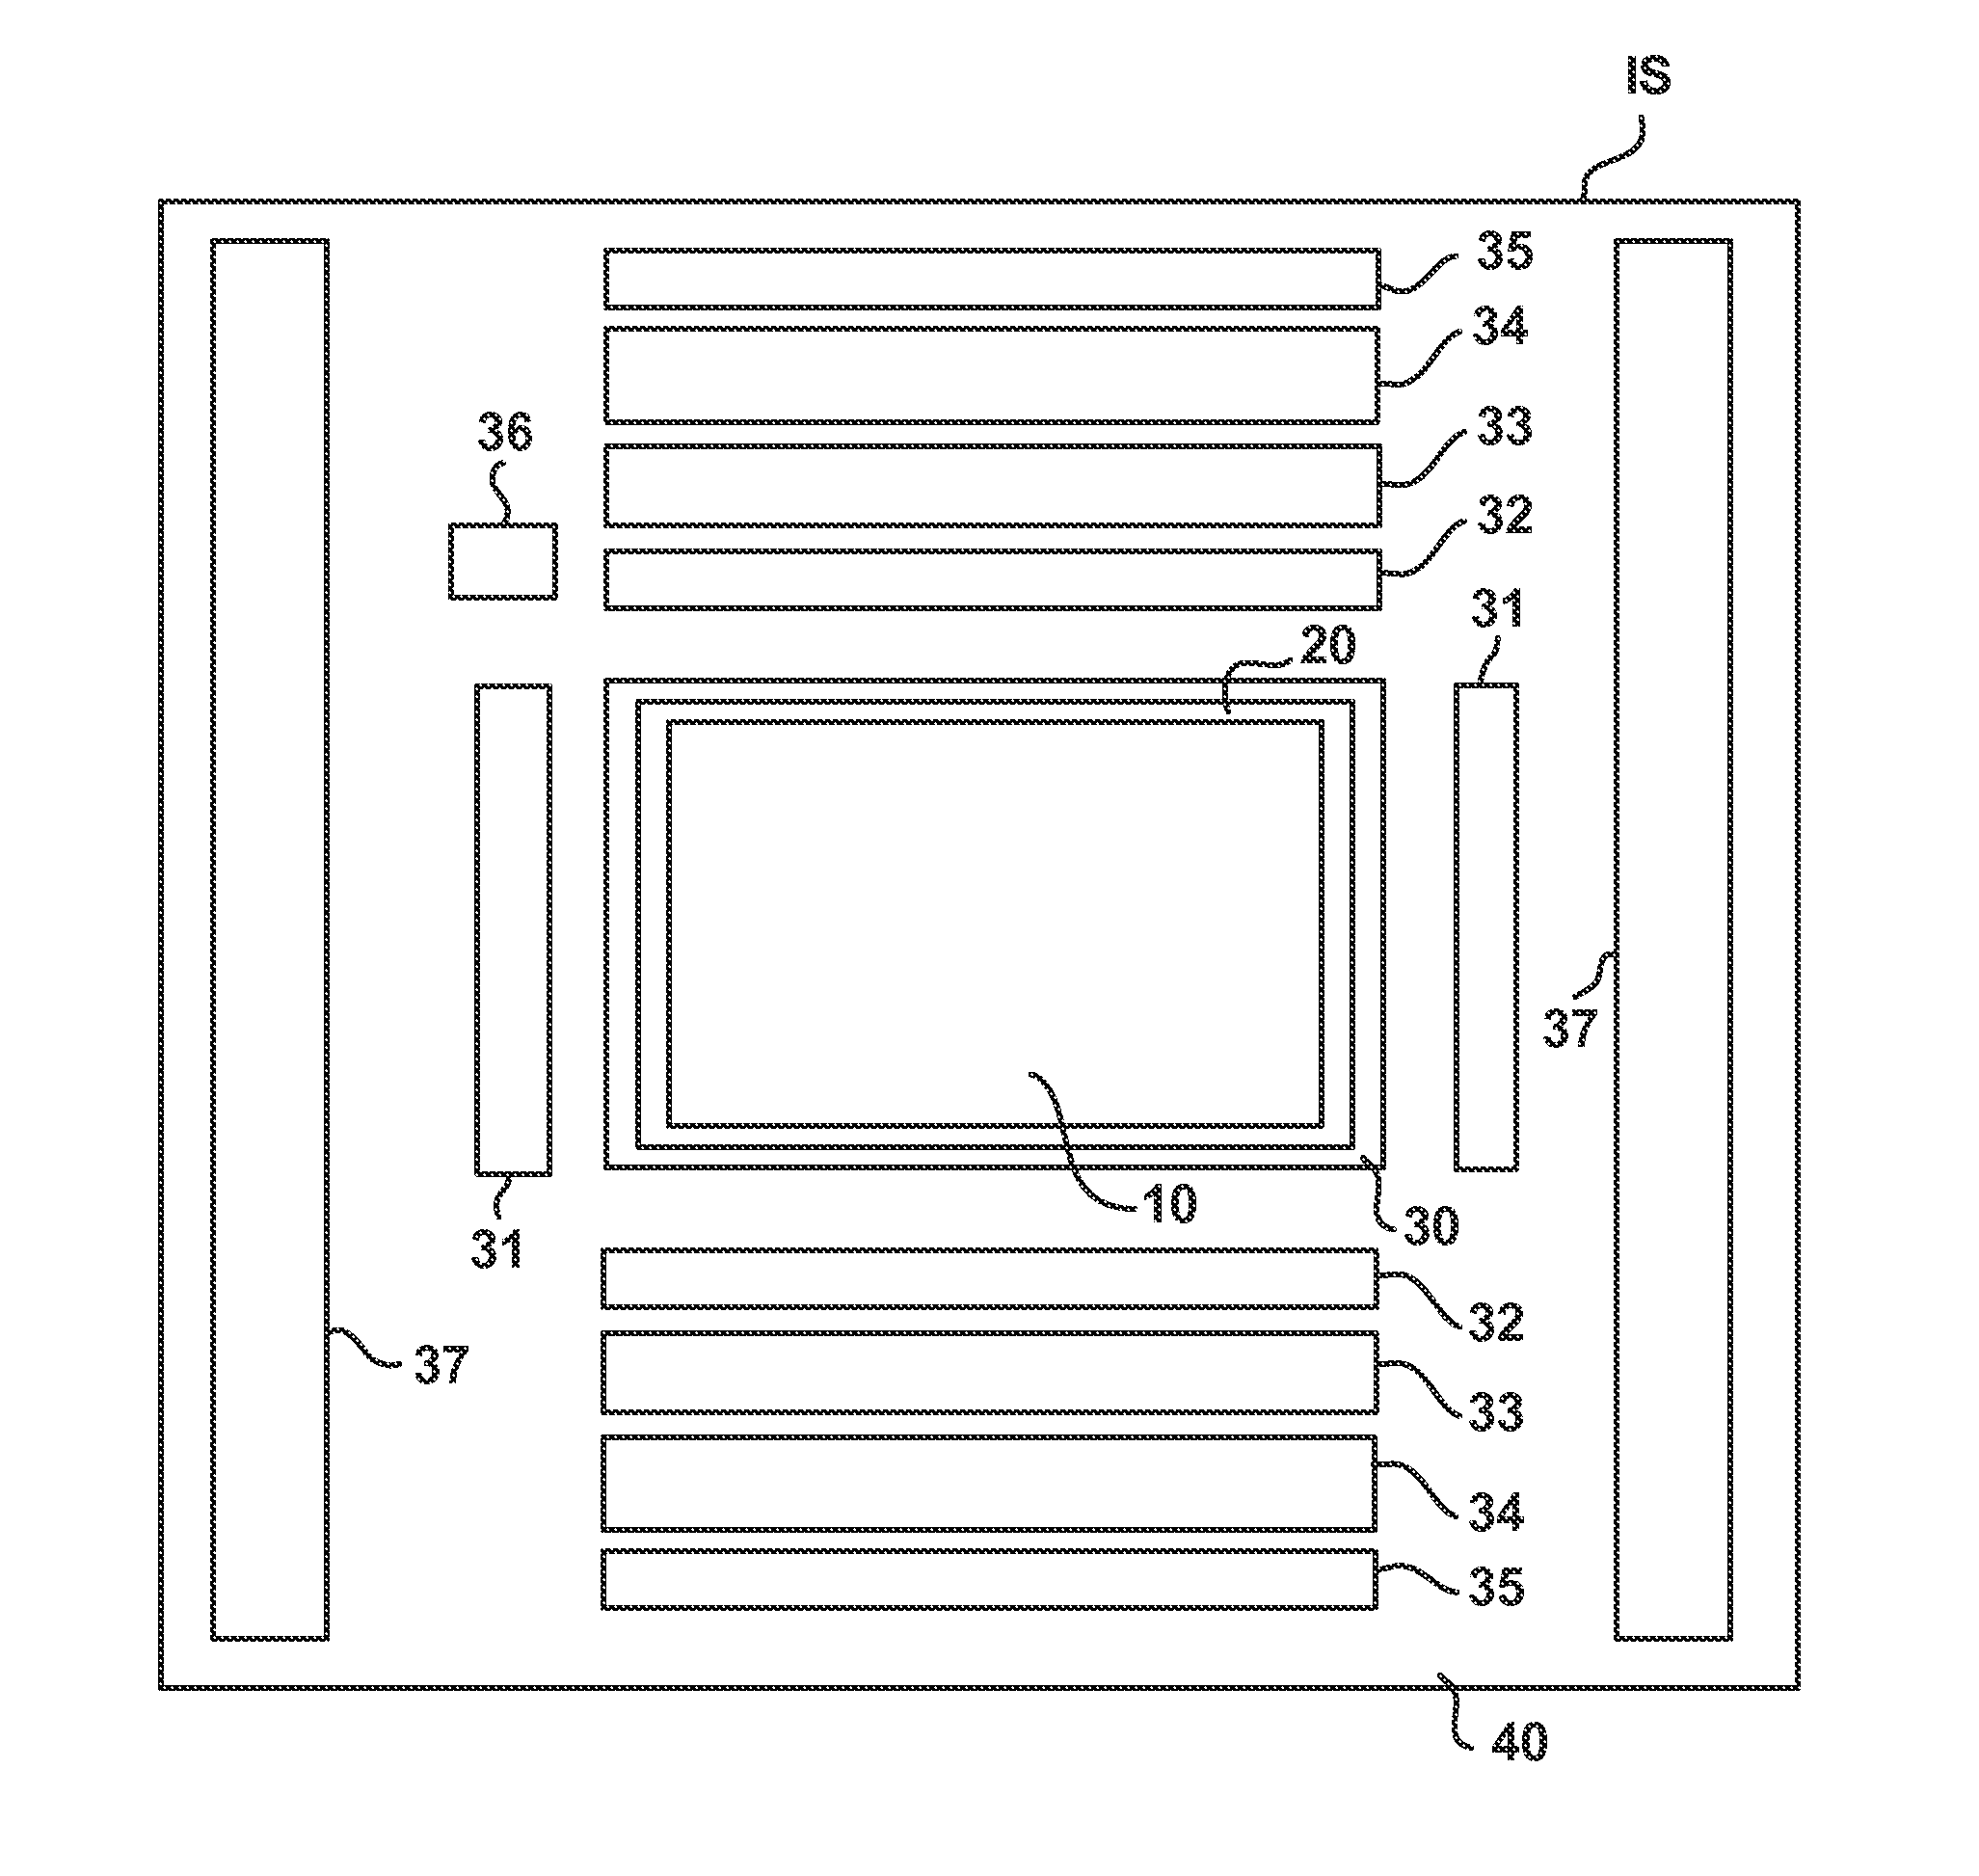 Solid-state image sensor, method for manufacturing the same, and camera